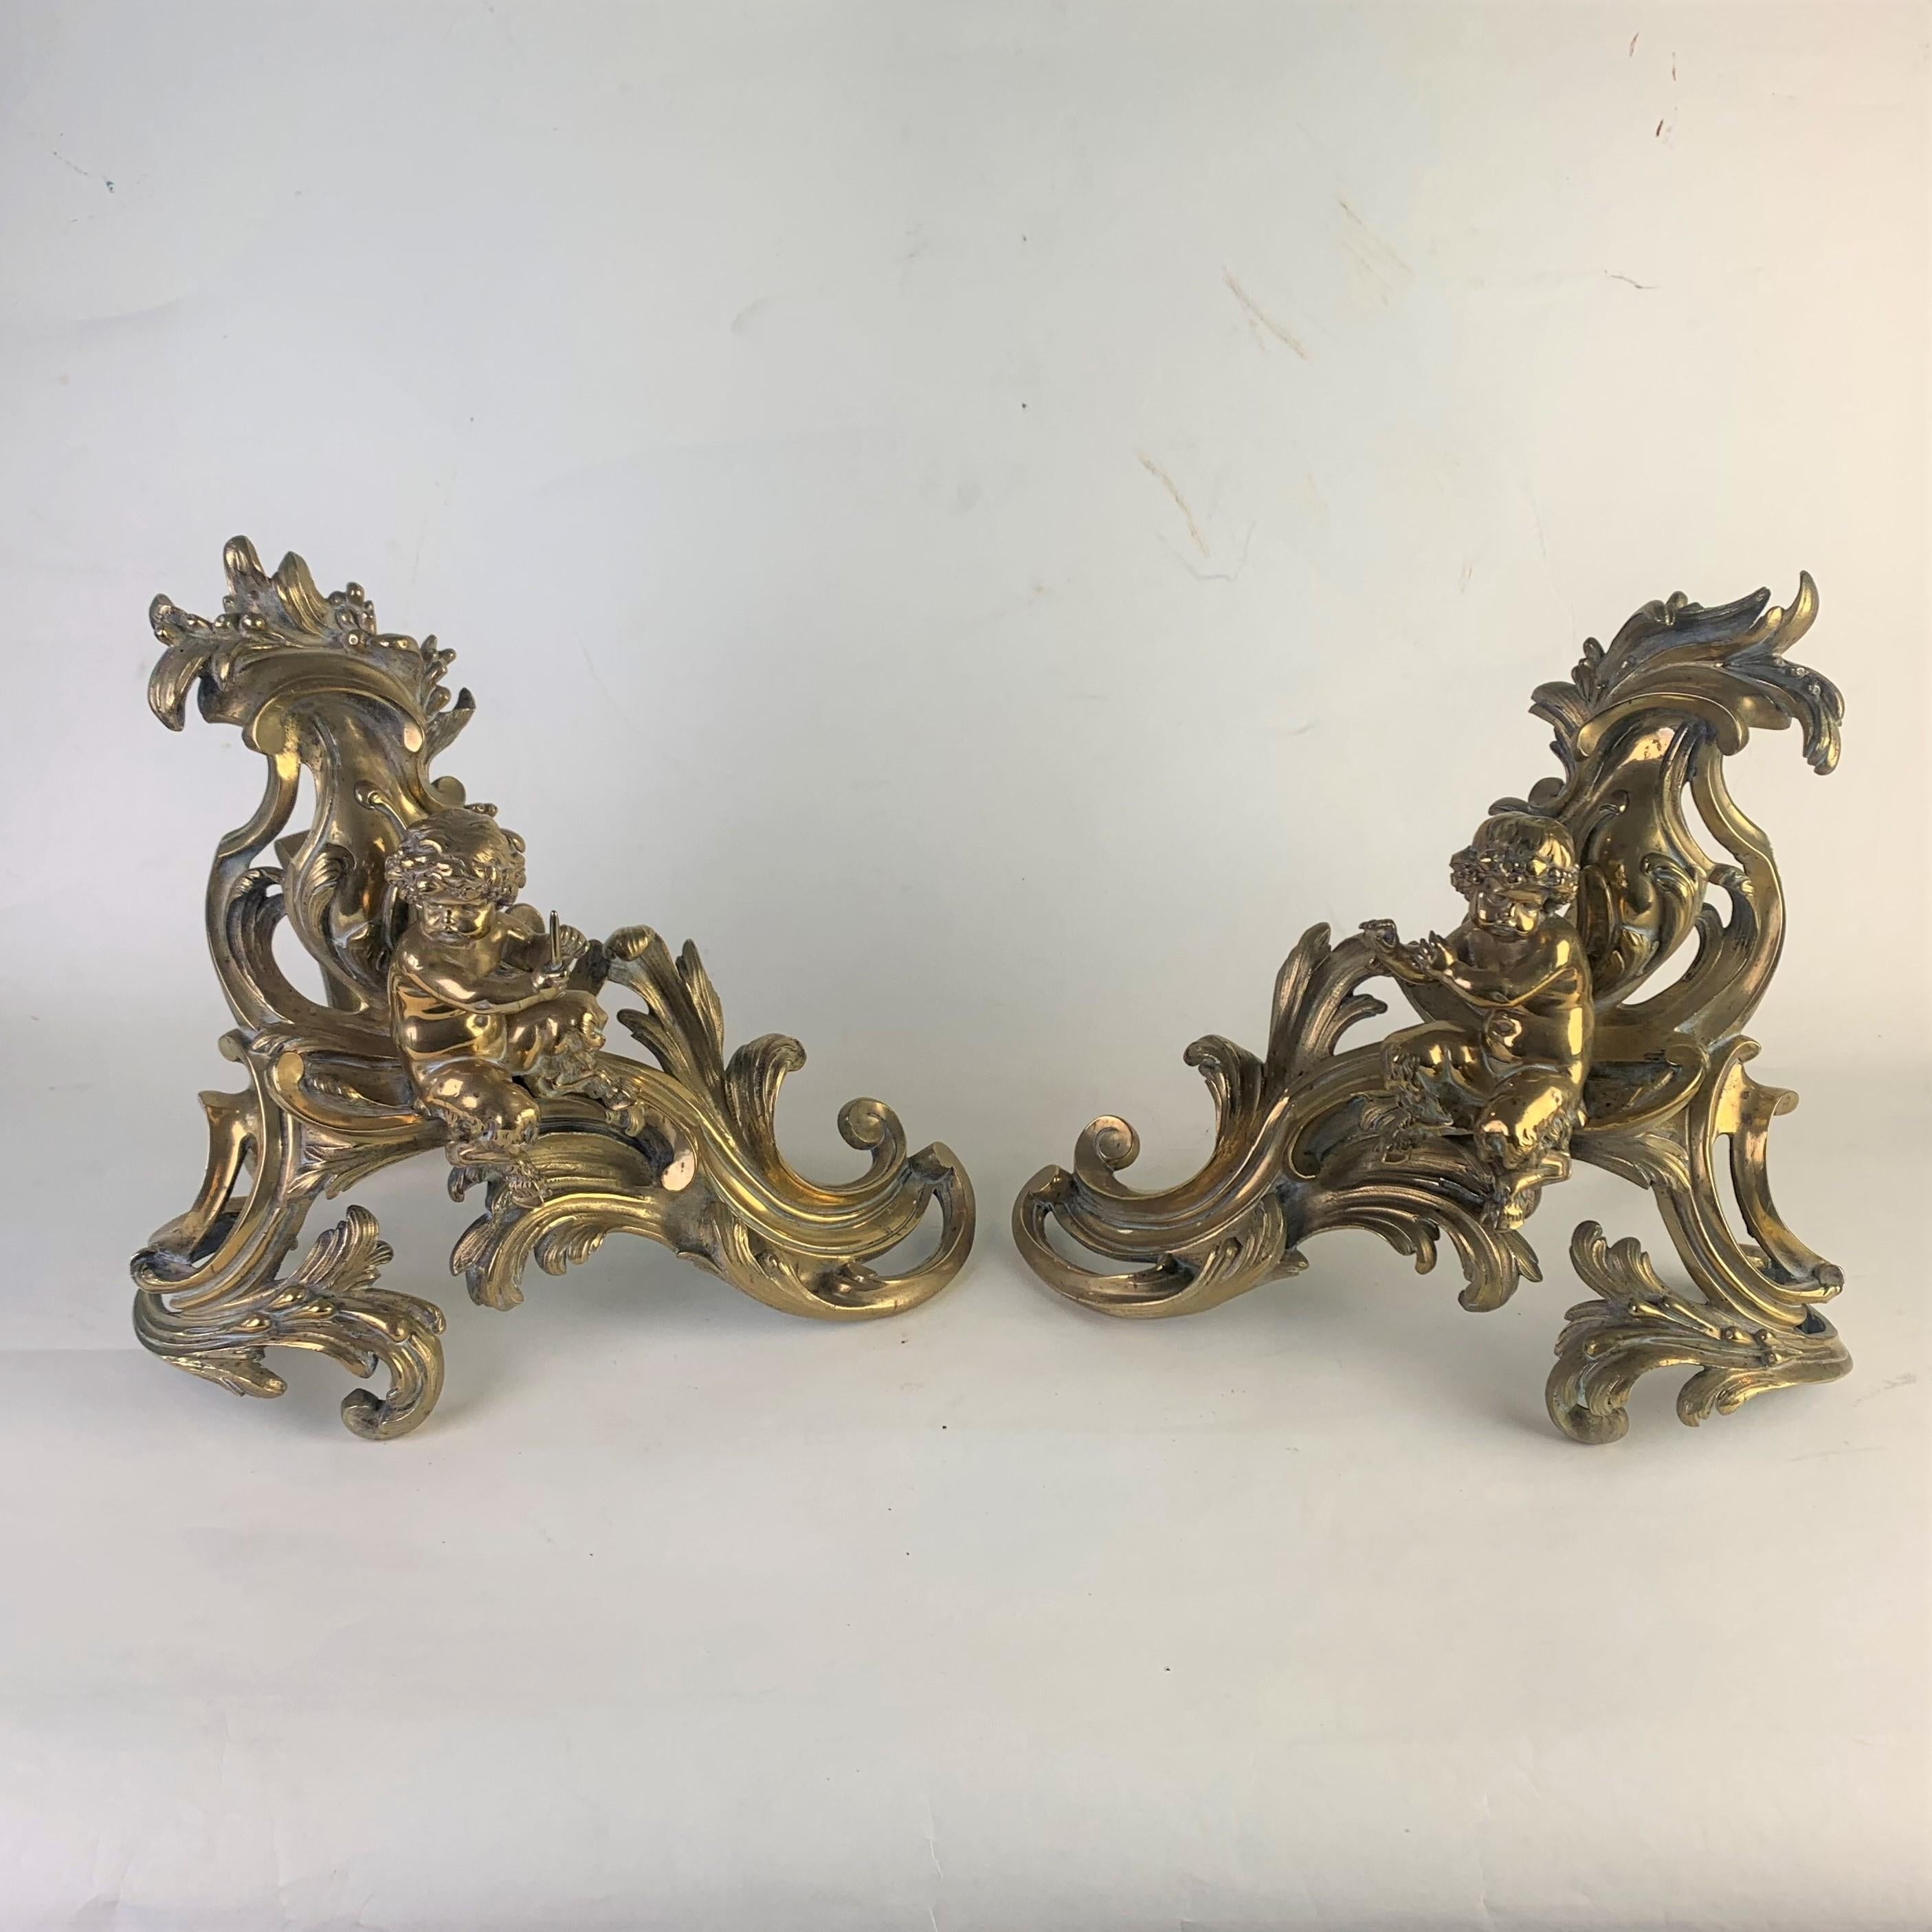 A very fine pair of late 19th century, opulent gilded brass fire chenets in the rococo taste. Depicting seated baby fawns holding candles within fancy scrolls.
Highly decorative examples original made for standing either side of a grand fireplace.